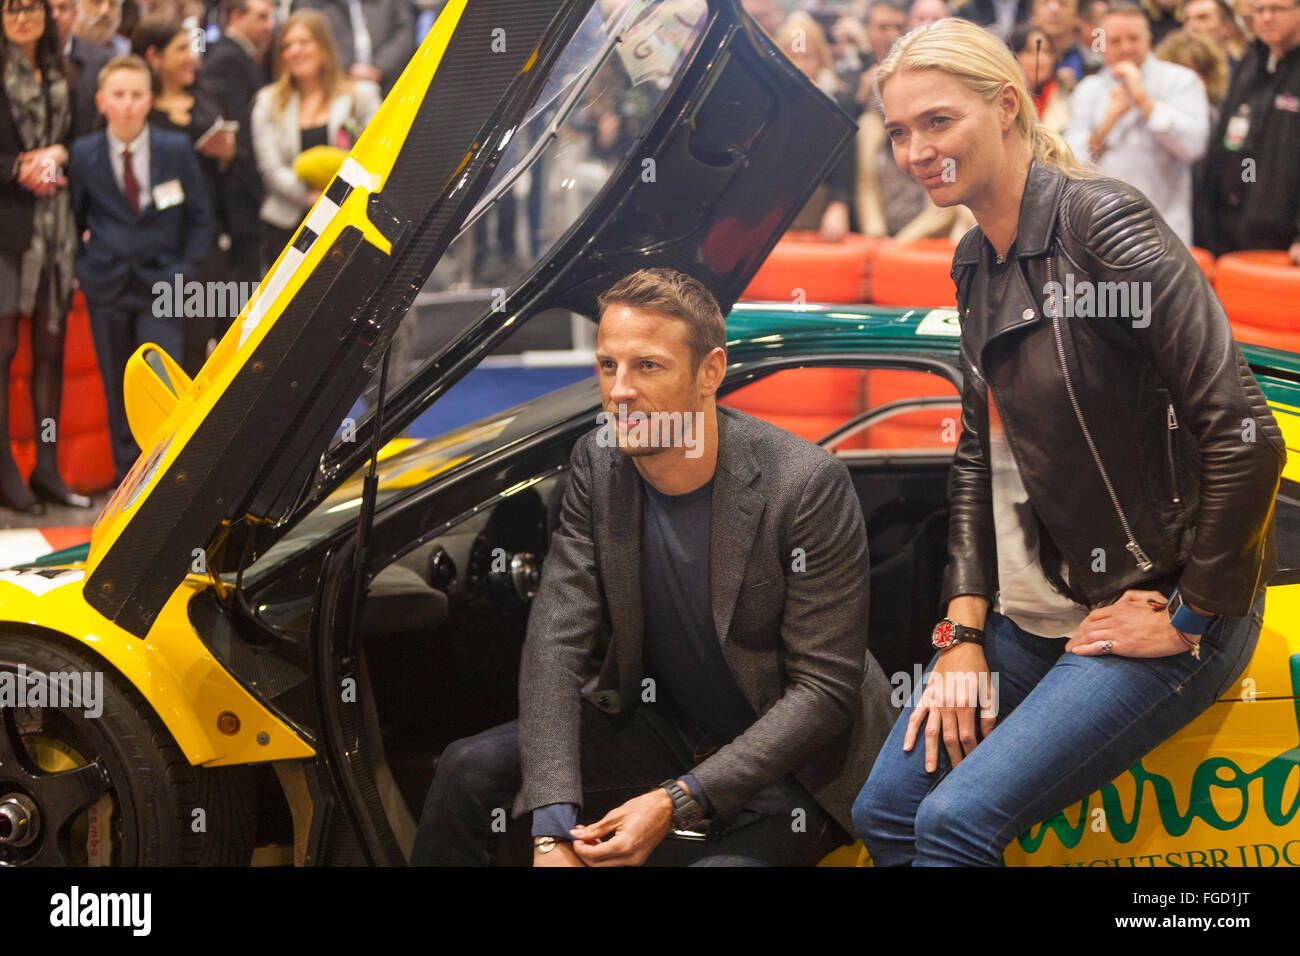 London, UK. 18th February, 2016. Jenson Button is breaking off from his busy preparations for the forthcoming grand prix season to attend the opening night of the London Classic Car Show (18-21 February) at Excel in London’s Docklands. The 2009 Formula One World Champion joins host BBC F1 presenter Suzi Perry, plus top guests from the motor sport and classic car worlds.   The star-studded Preview Evening starts a four-day Great Debate to determine ‘which nation has produced the world’s best cars’. Credit:  Bluefly/Alamy Live News Stock Photo